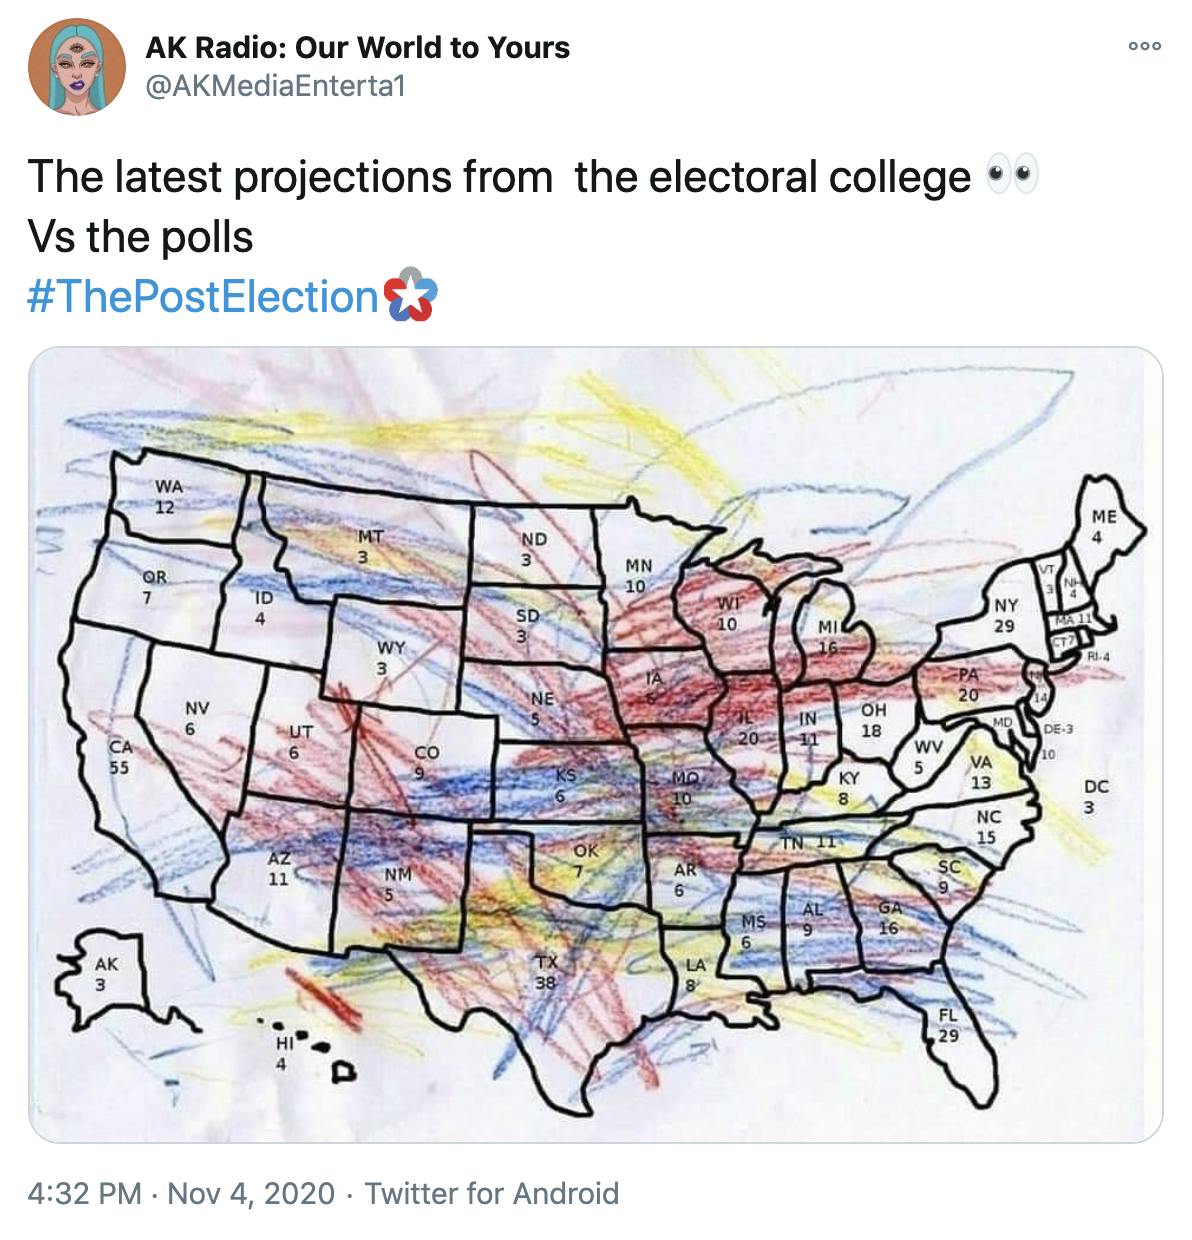 'The latest projections from the electoral college Eyes Vs the polls #ThePostElection' Black and white image of the electoral college map scribbled over with multiple colours of crayon